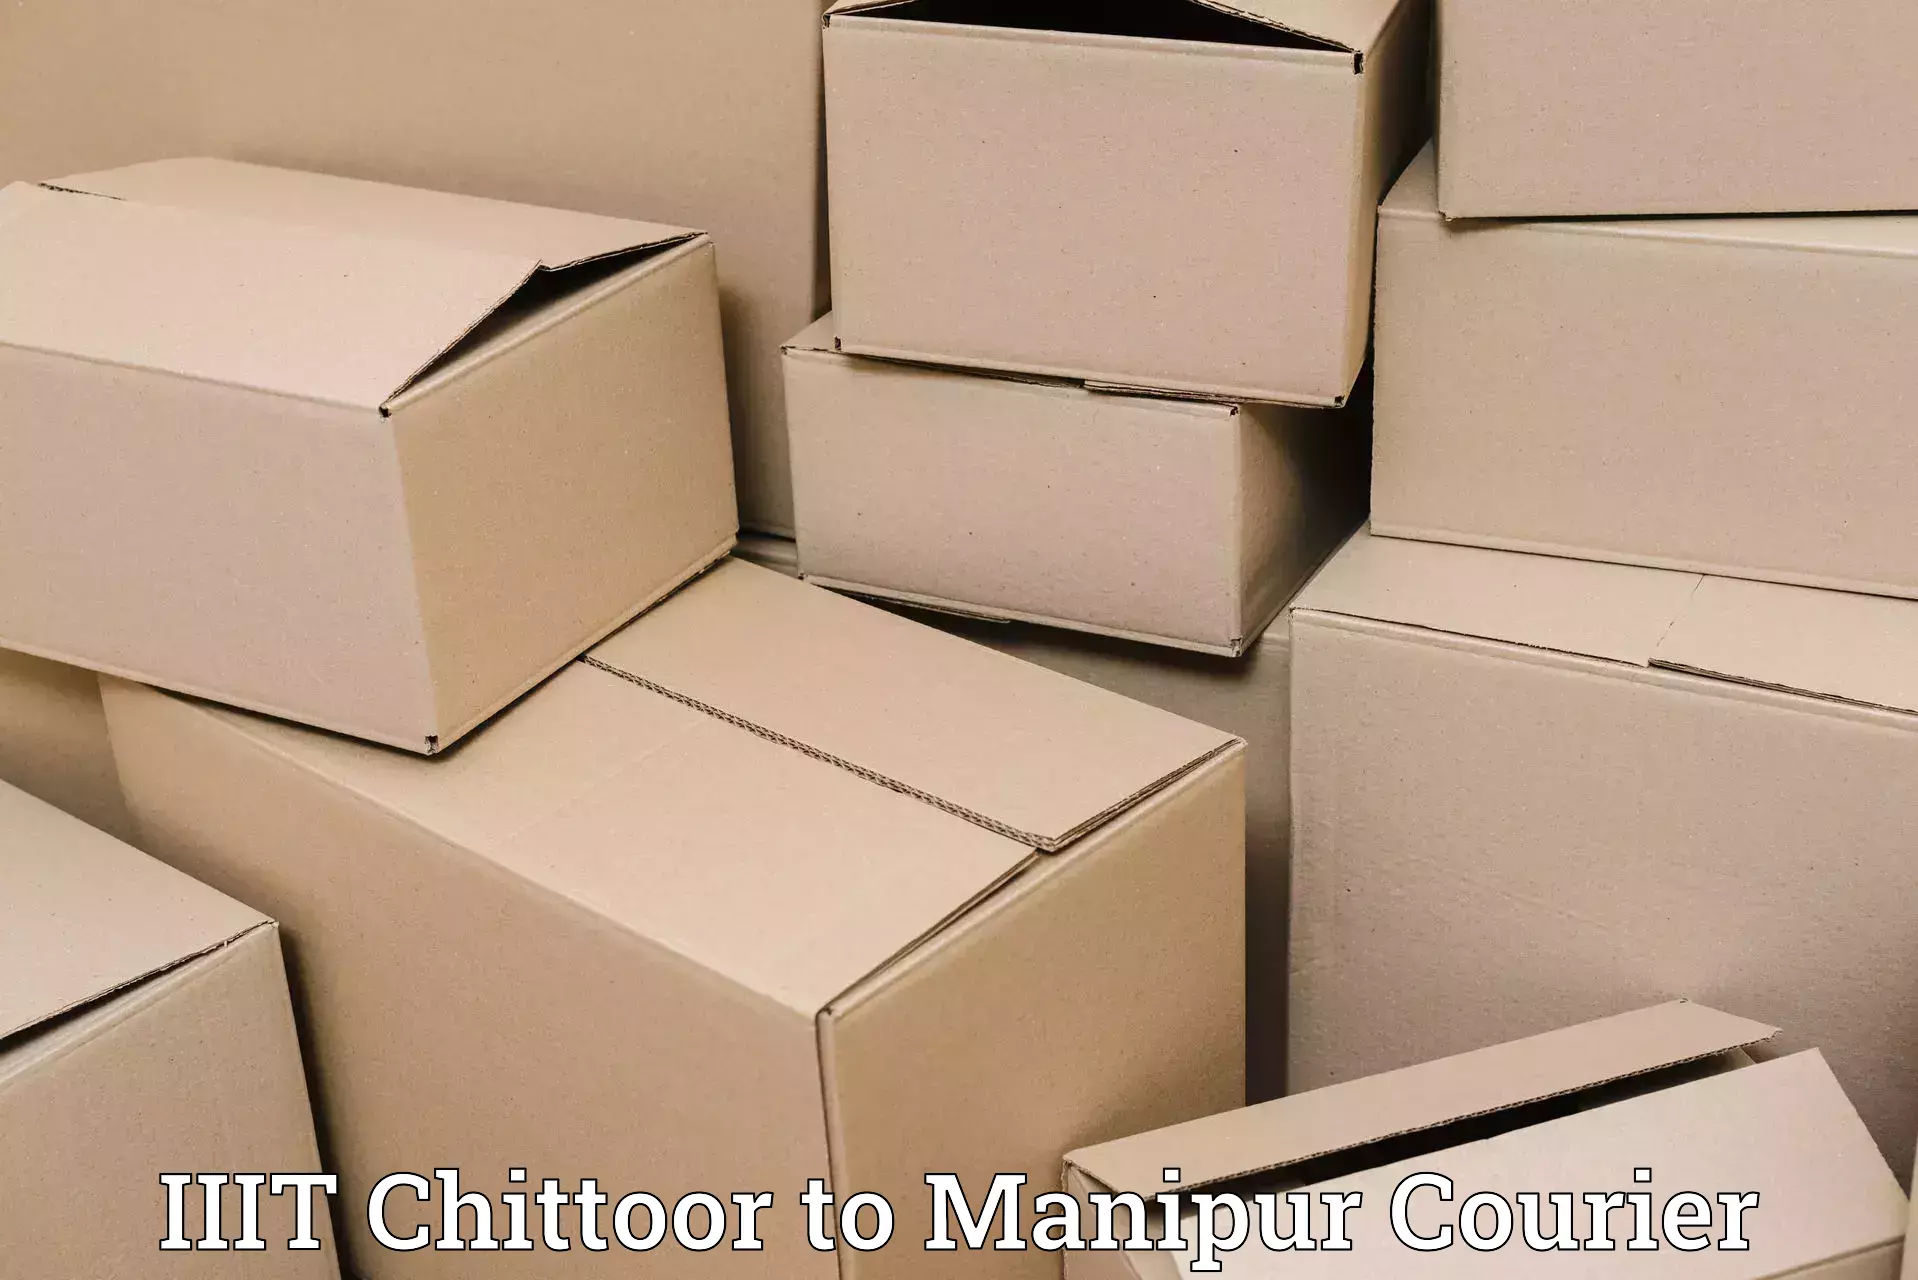 Express delivery capabilities IIIT Chittoor to NIT Manipur